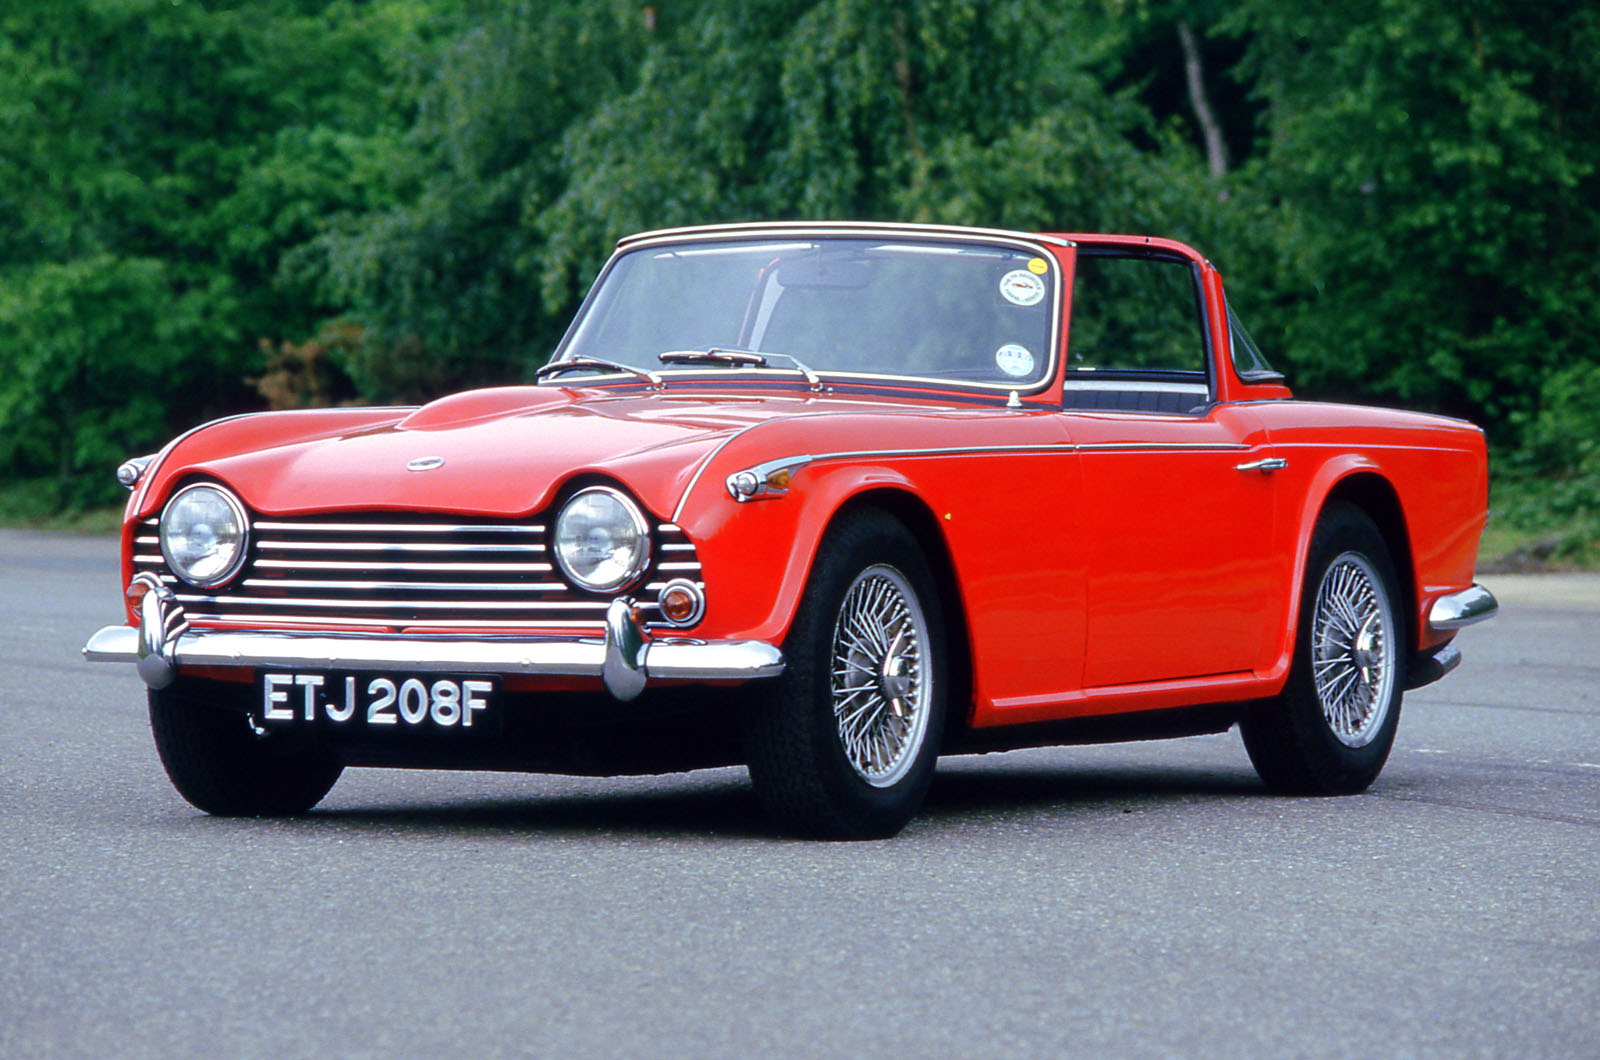 The top 100 best-ever British cars